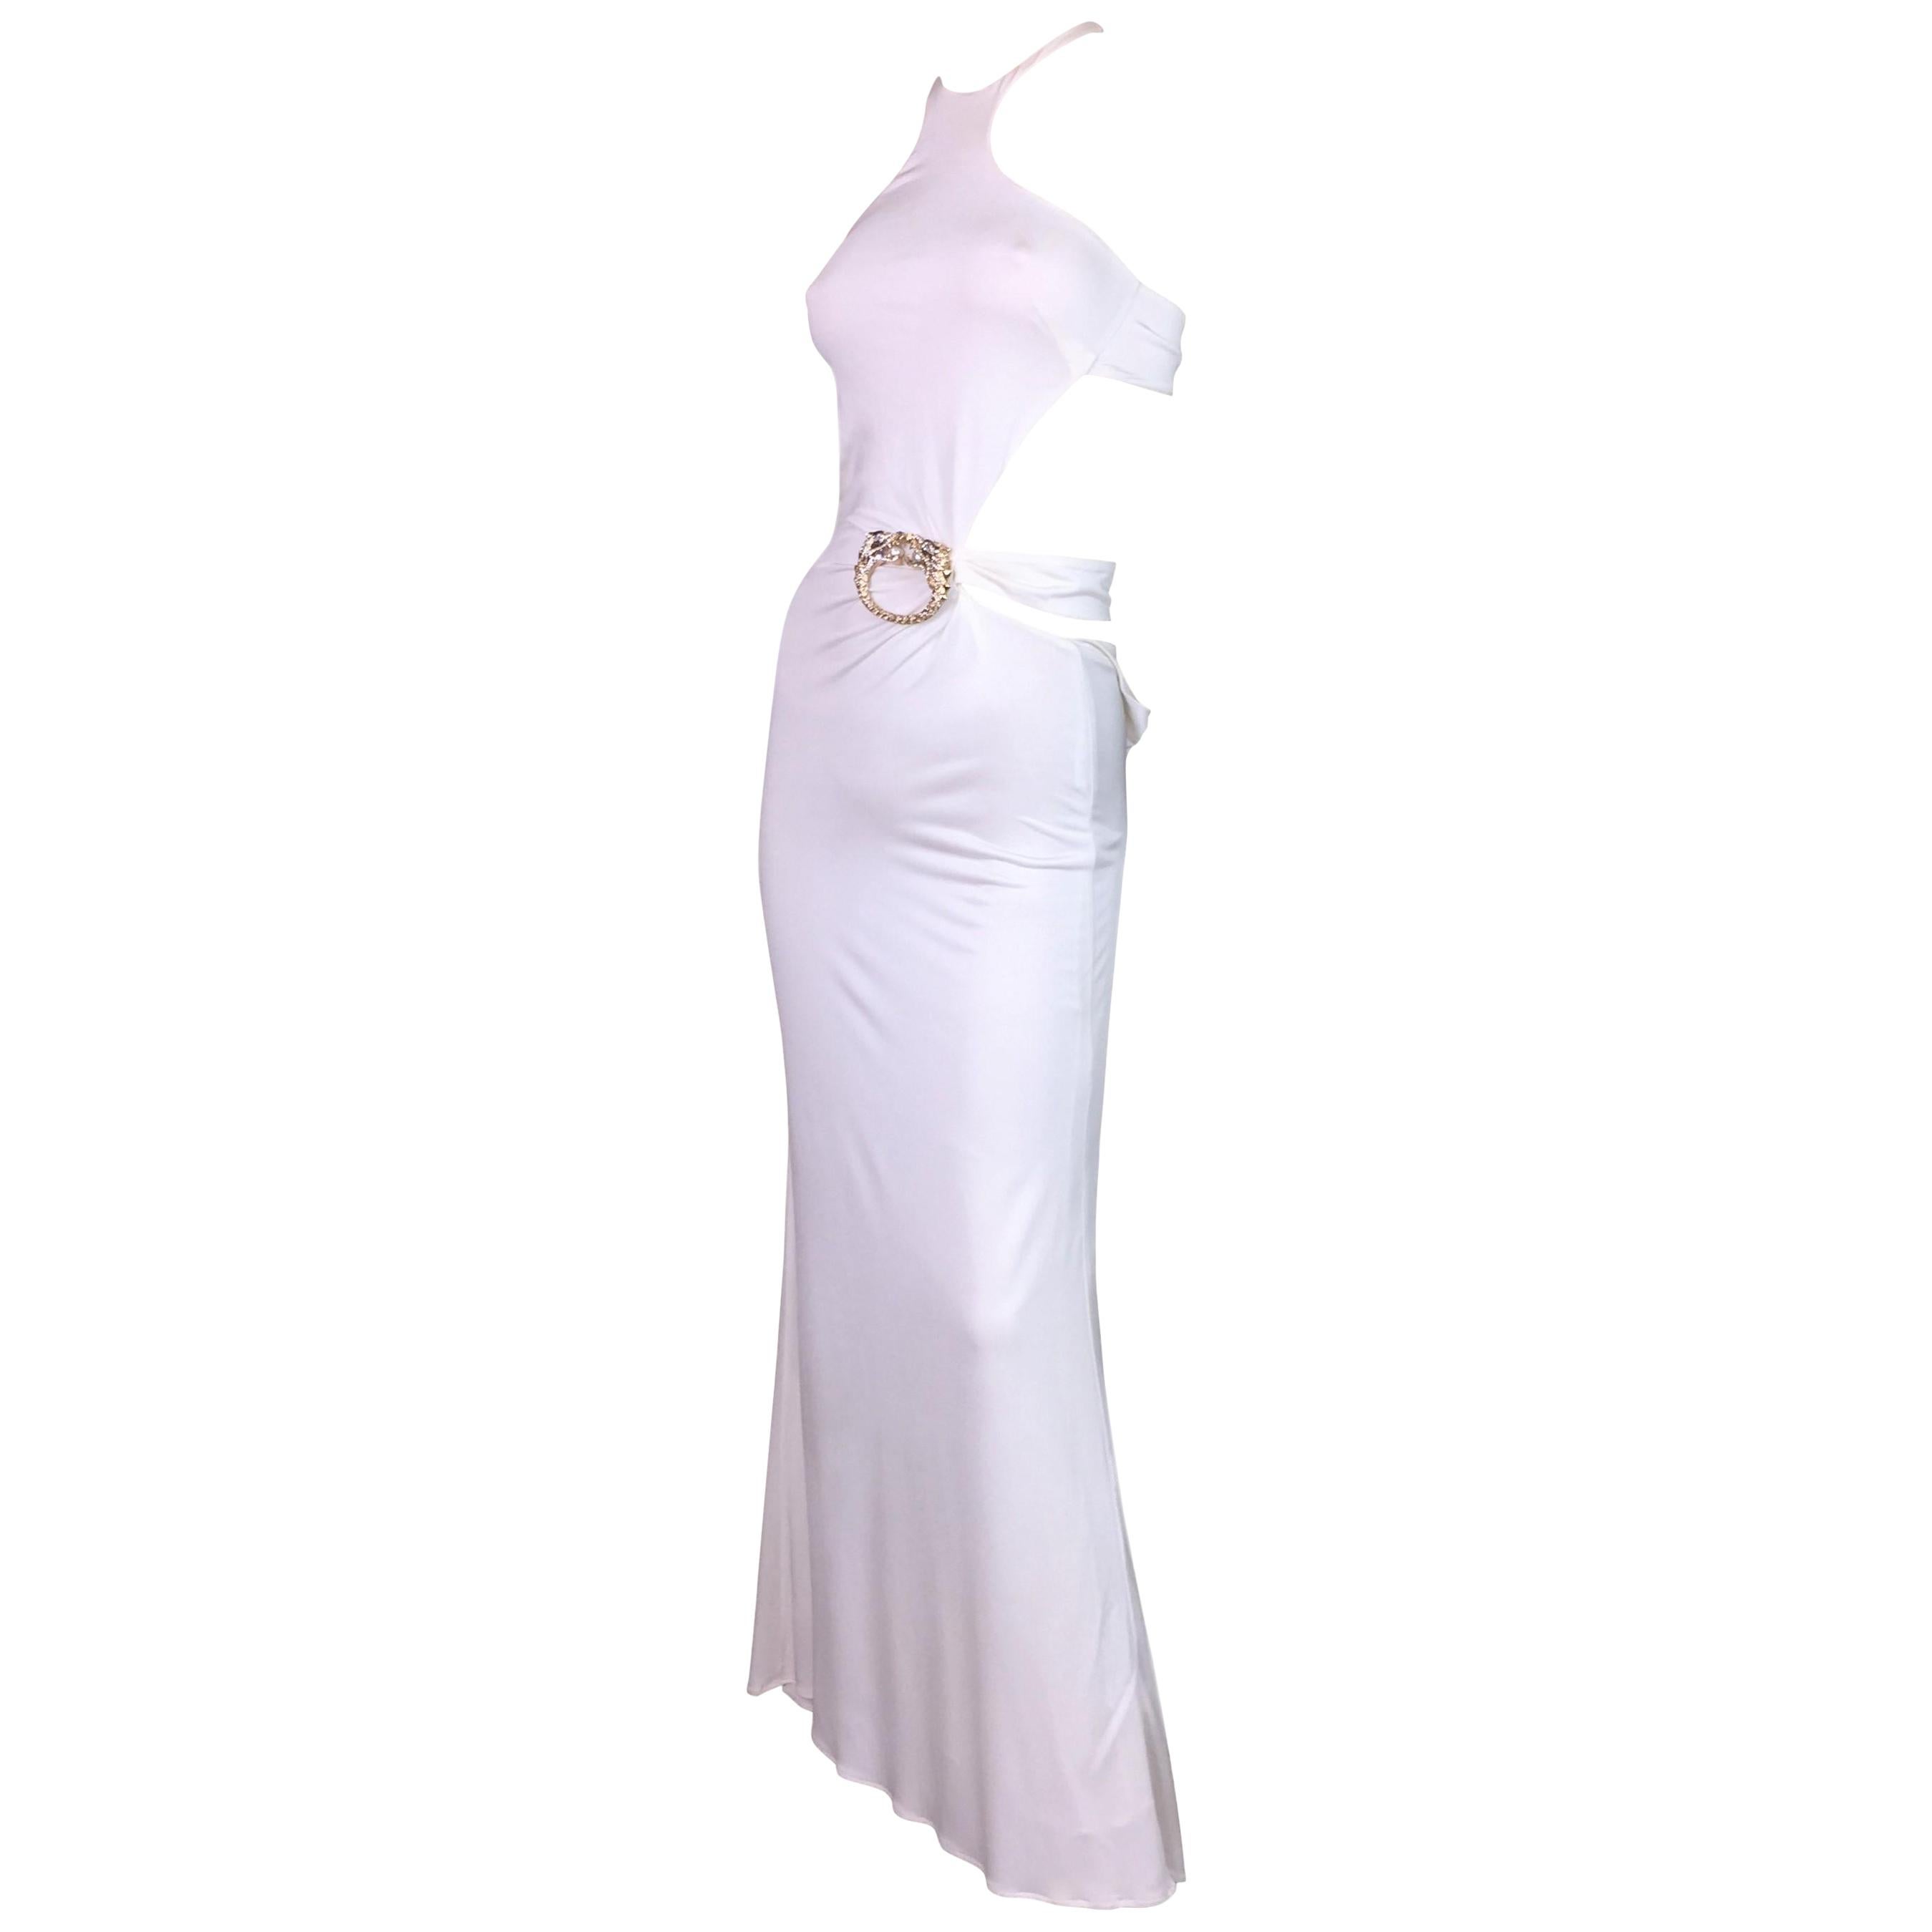 F/W 2004 Gucci Tom Ford Runway White Cut-Out Dragon Brooch Gown Dress